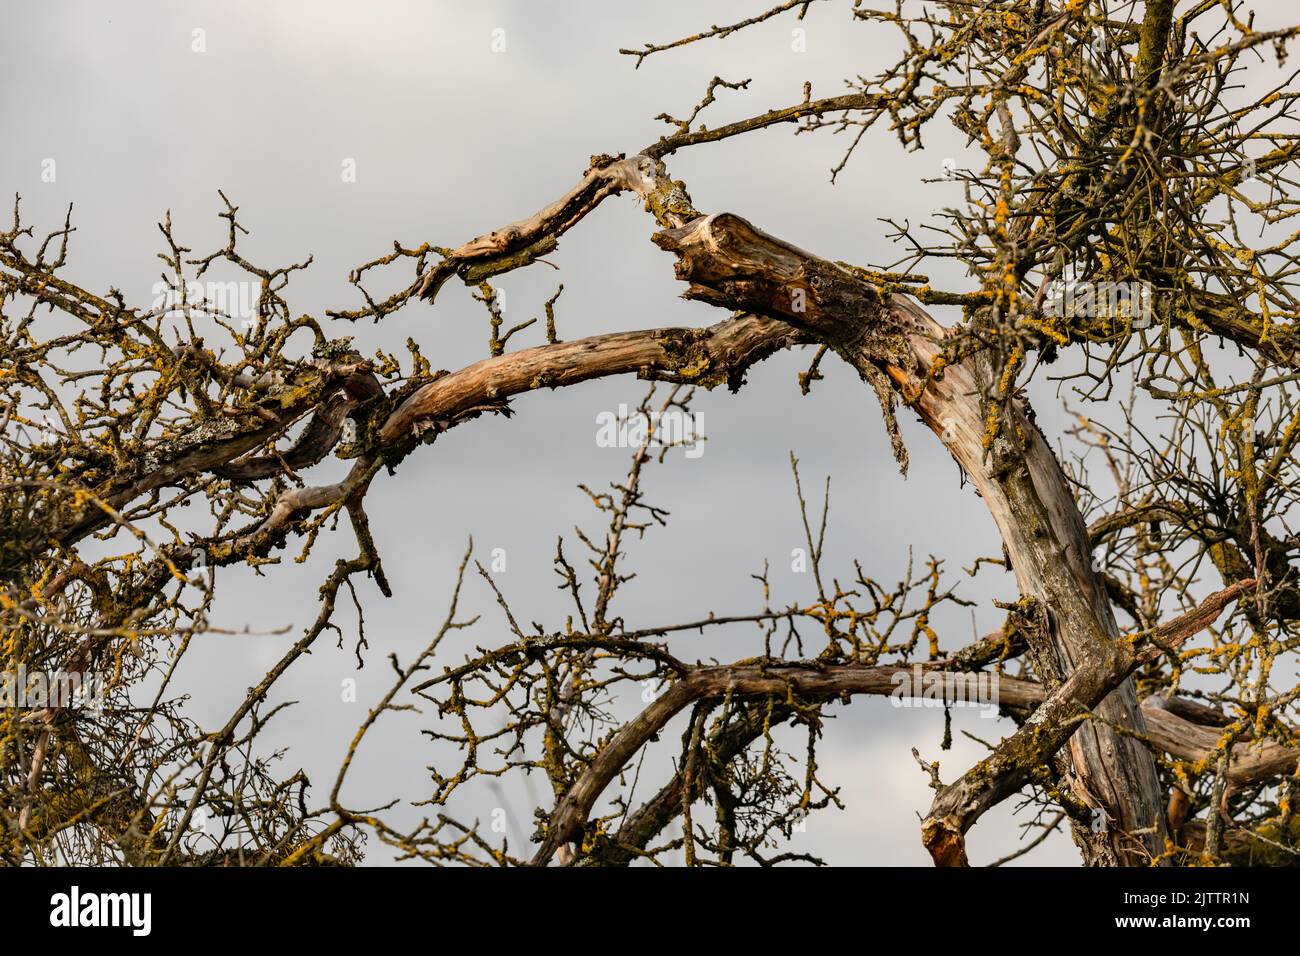 After the strong wind in winter, the damage and the tree breakage become apparent Stock Photo